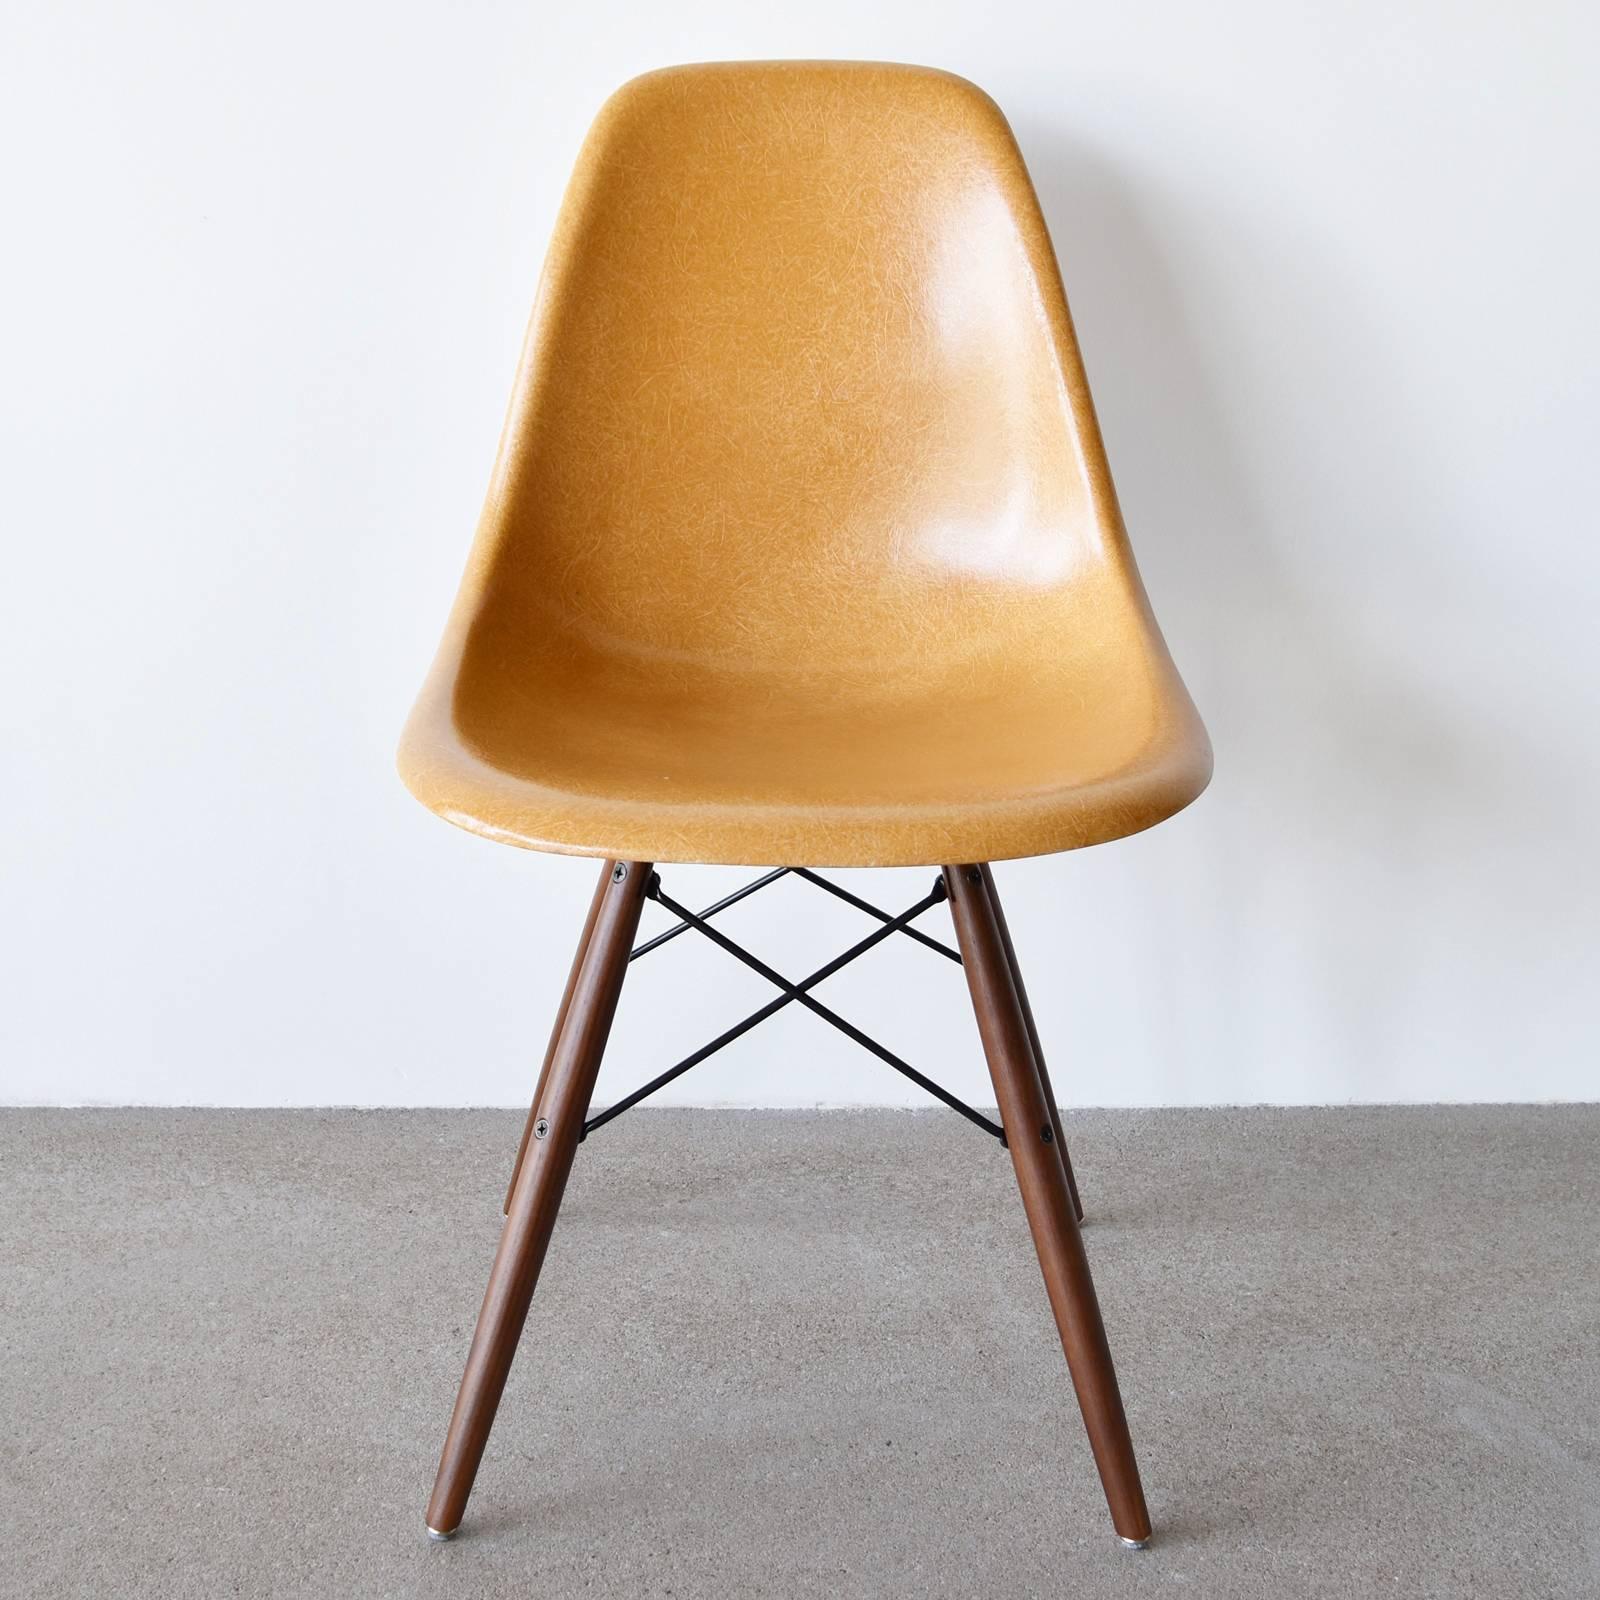 Beautiful iconic Ochre Dark DSW chairs. The shells are in very good / excellent condition with only slight traces of use. Replaced shock mounts which guarantee save usability for the next decades. Each chair is signed with embossed Herman Miller